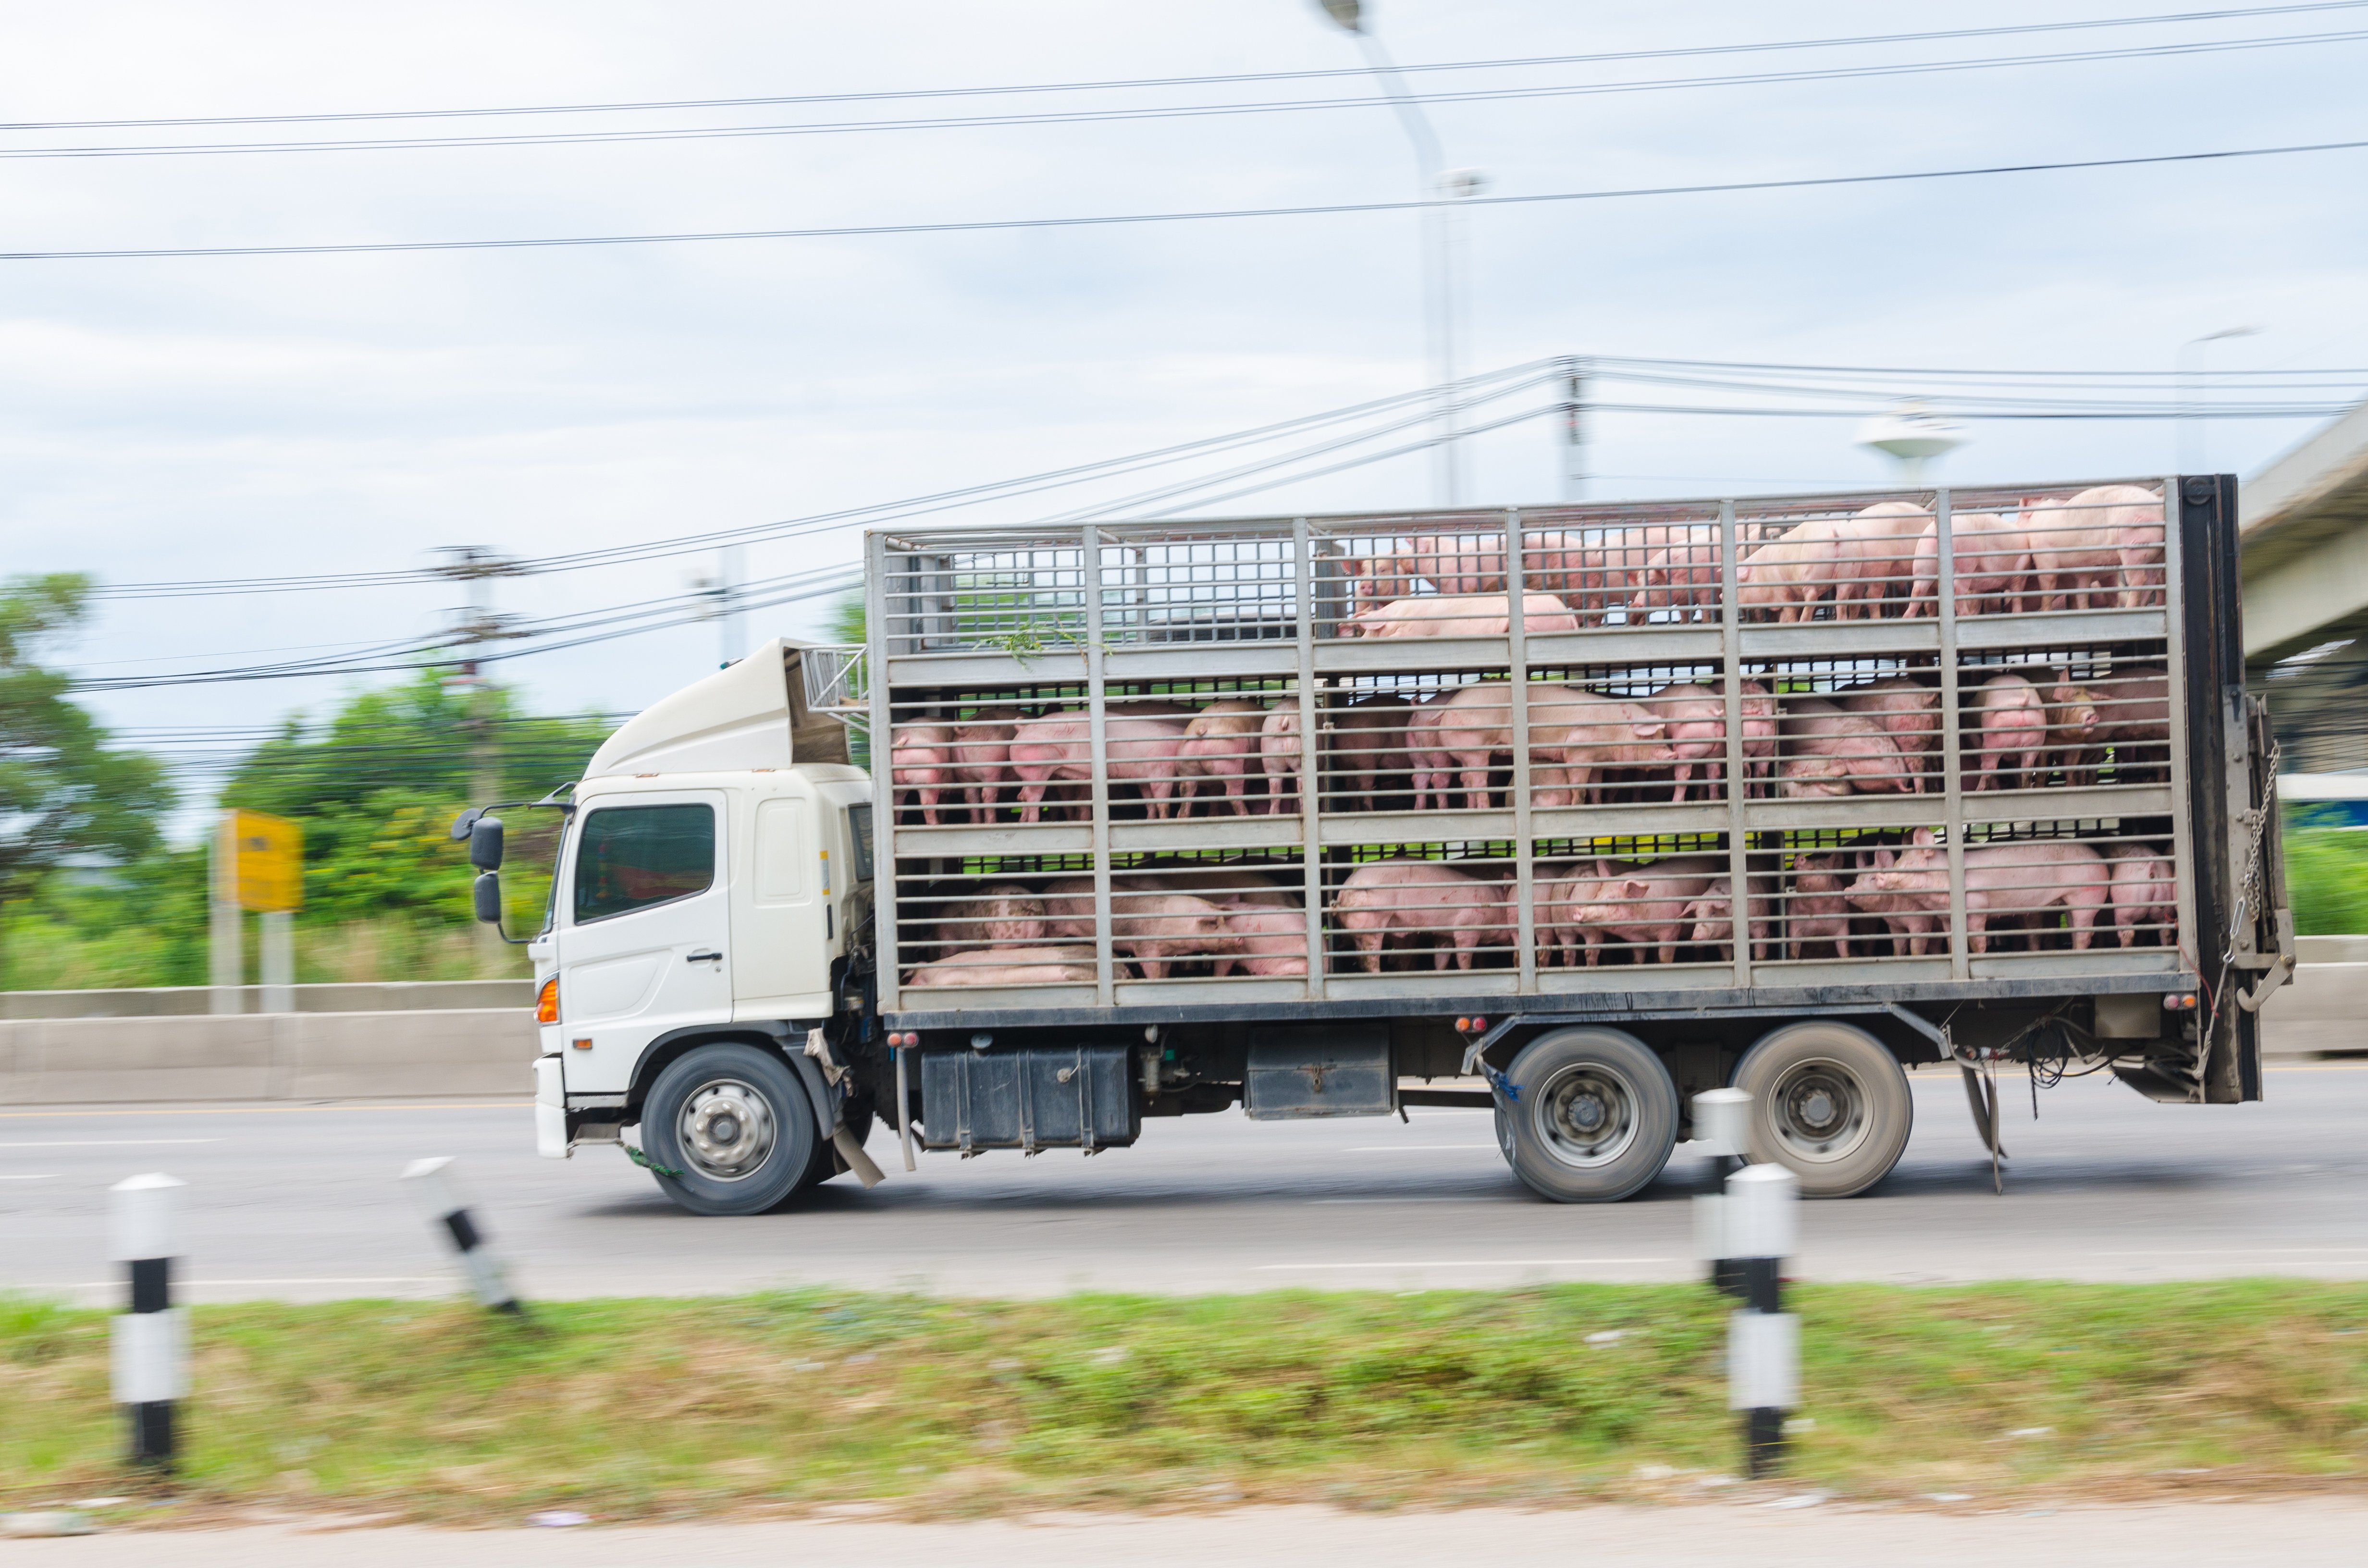 Truck running on the road, carrying pigs | Photo: Shutterstock.com 